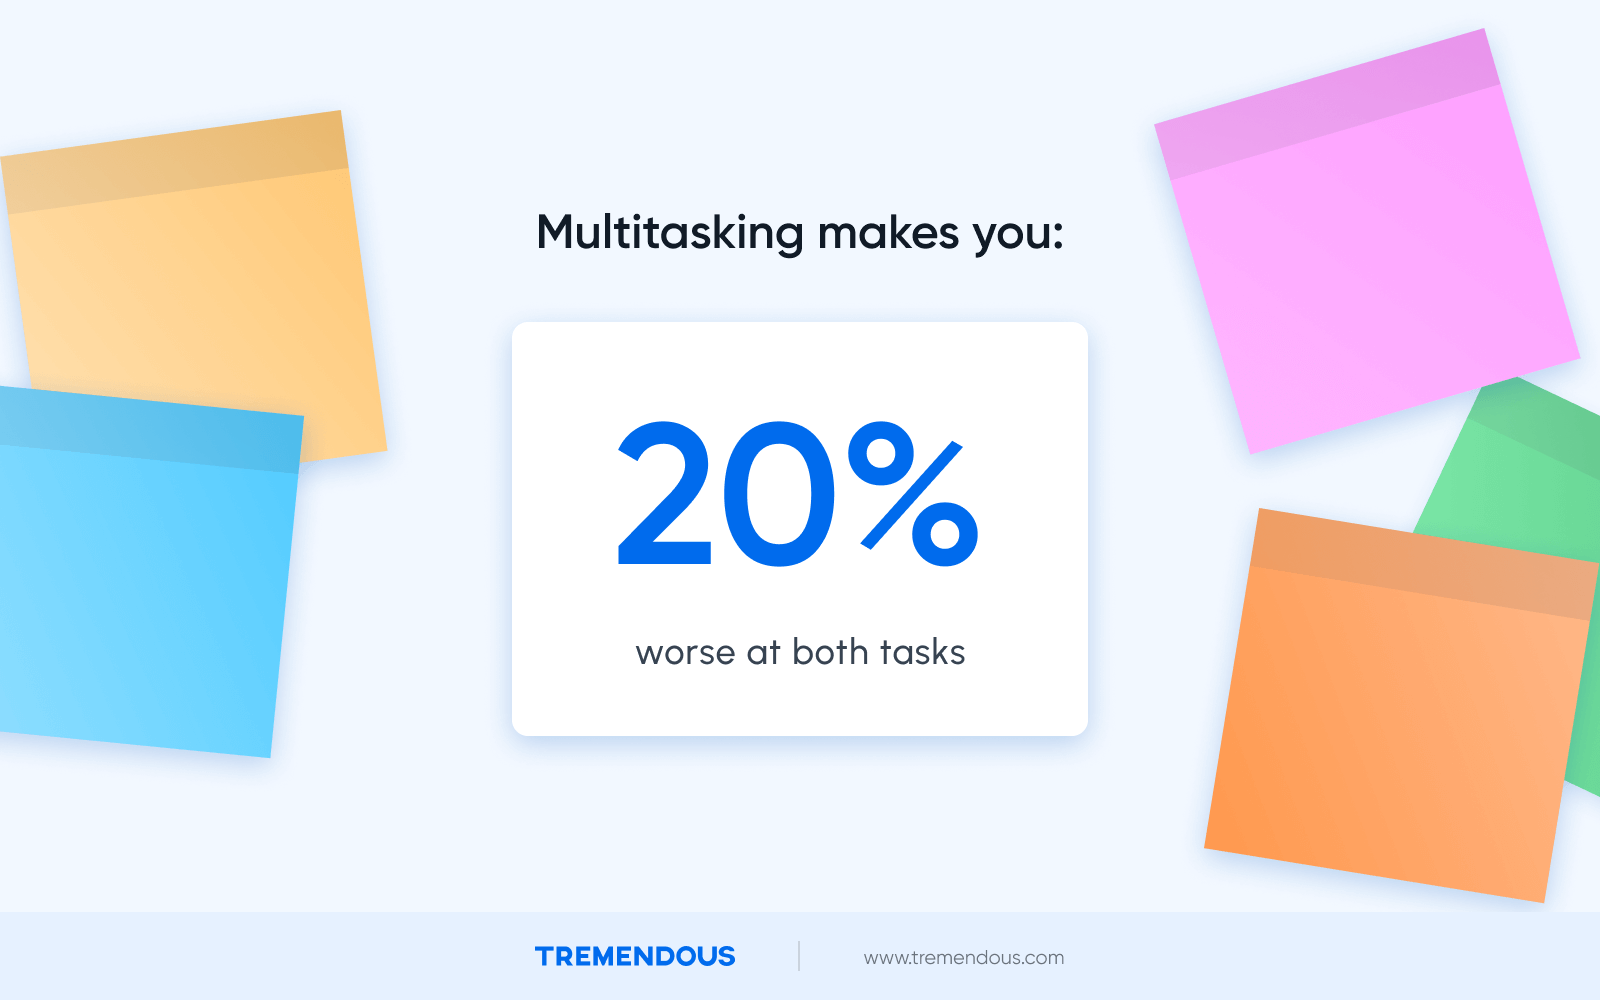 Colorful Post-It notes surround text that reads "Multitasking makes you 20% worse at both tasks."